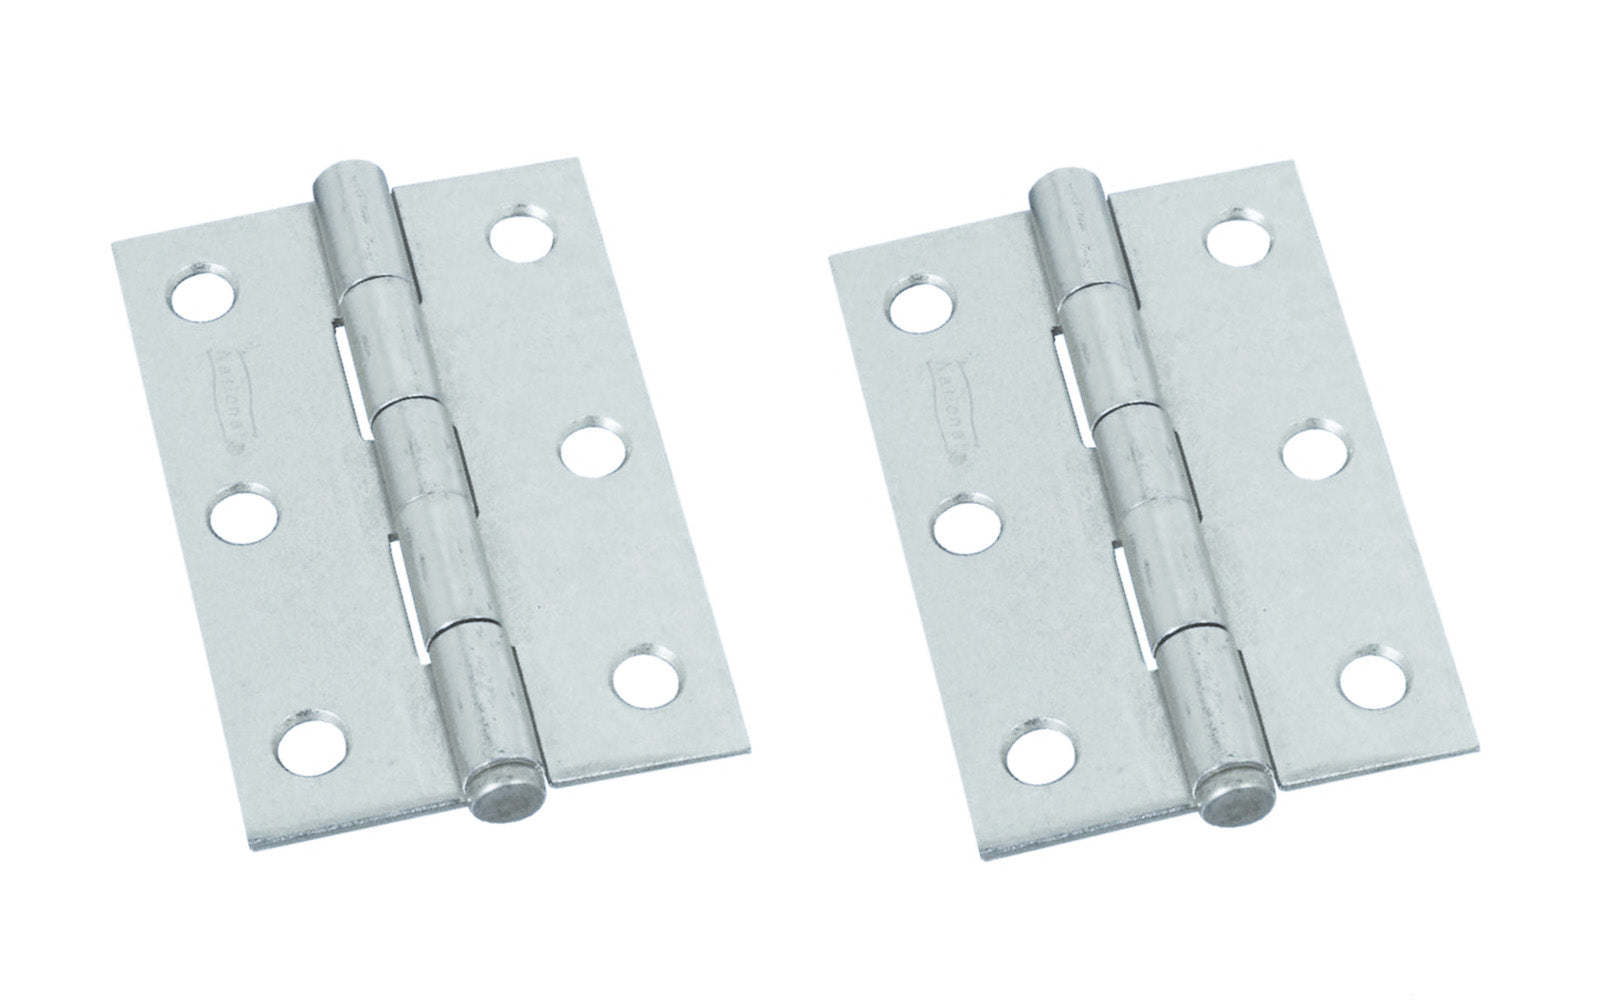 3" Zinc-Plated Loose-Pin Narrow Hinges - 2 Pack. 3" high x 2-1/16" wide. Made of cold-rolled steel with zinc plating. Surface mount. Removable pin hinges. Sold as a pair of hinges. National Hardware Model No. N142-034. 038613142039